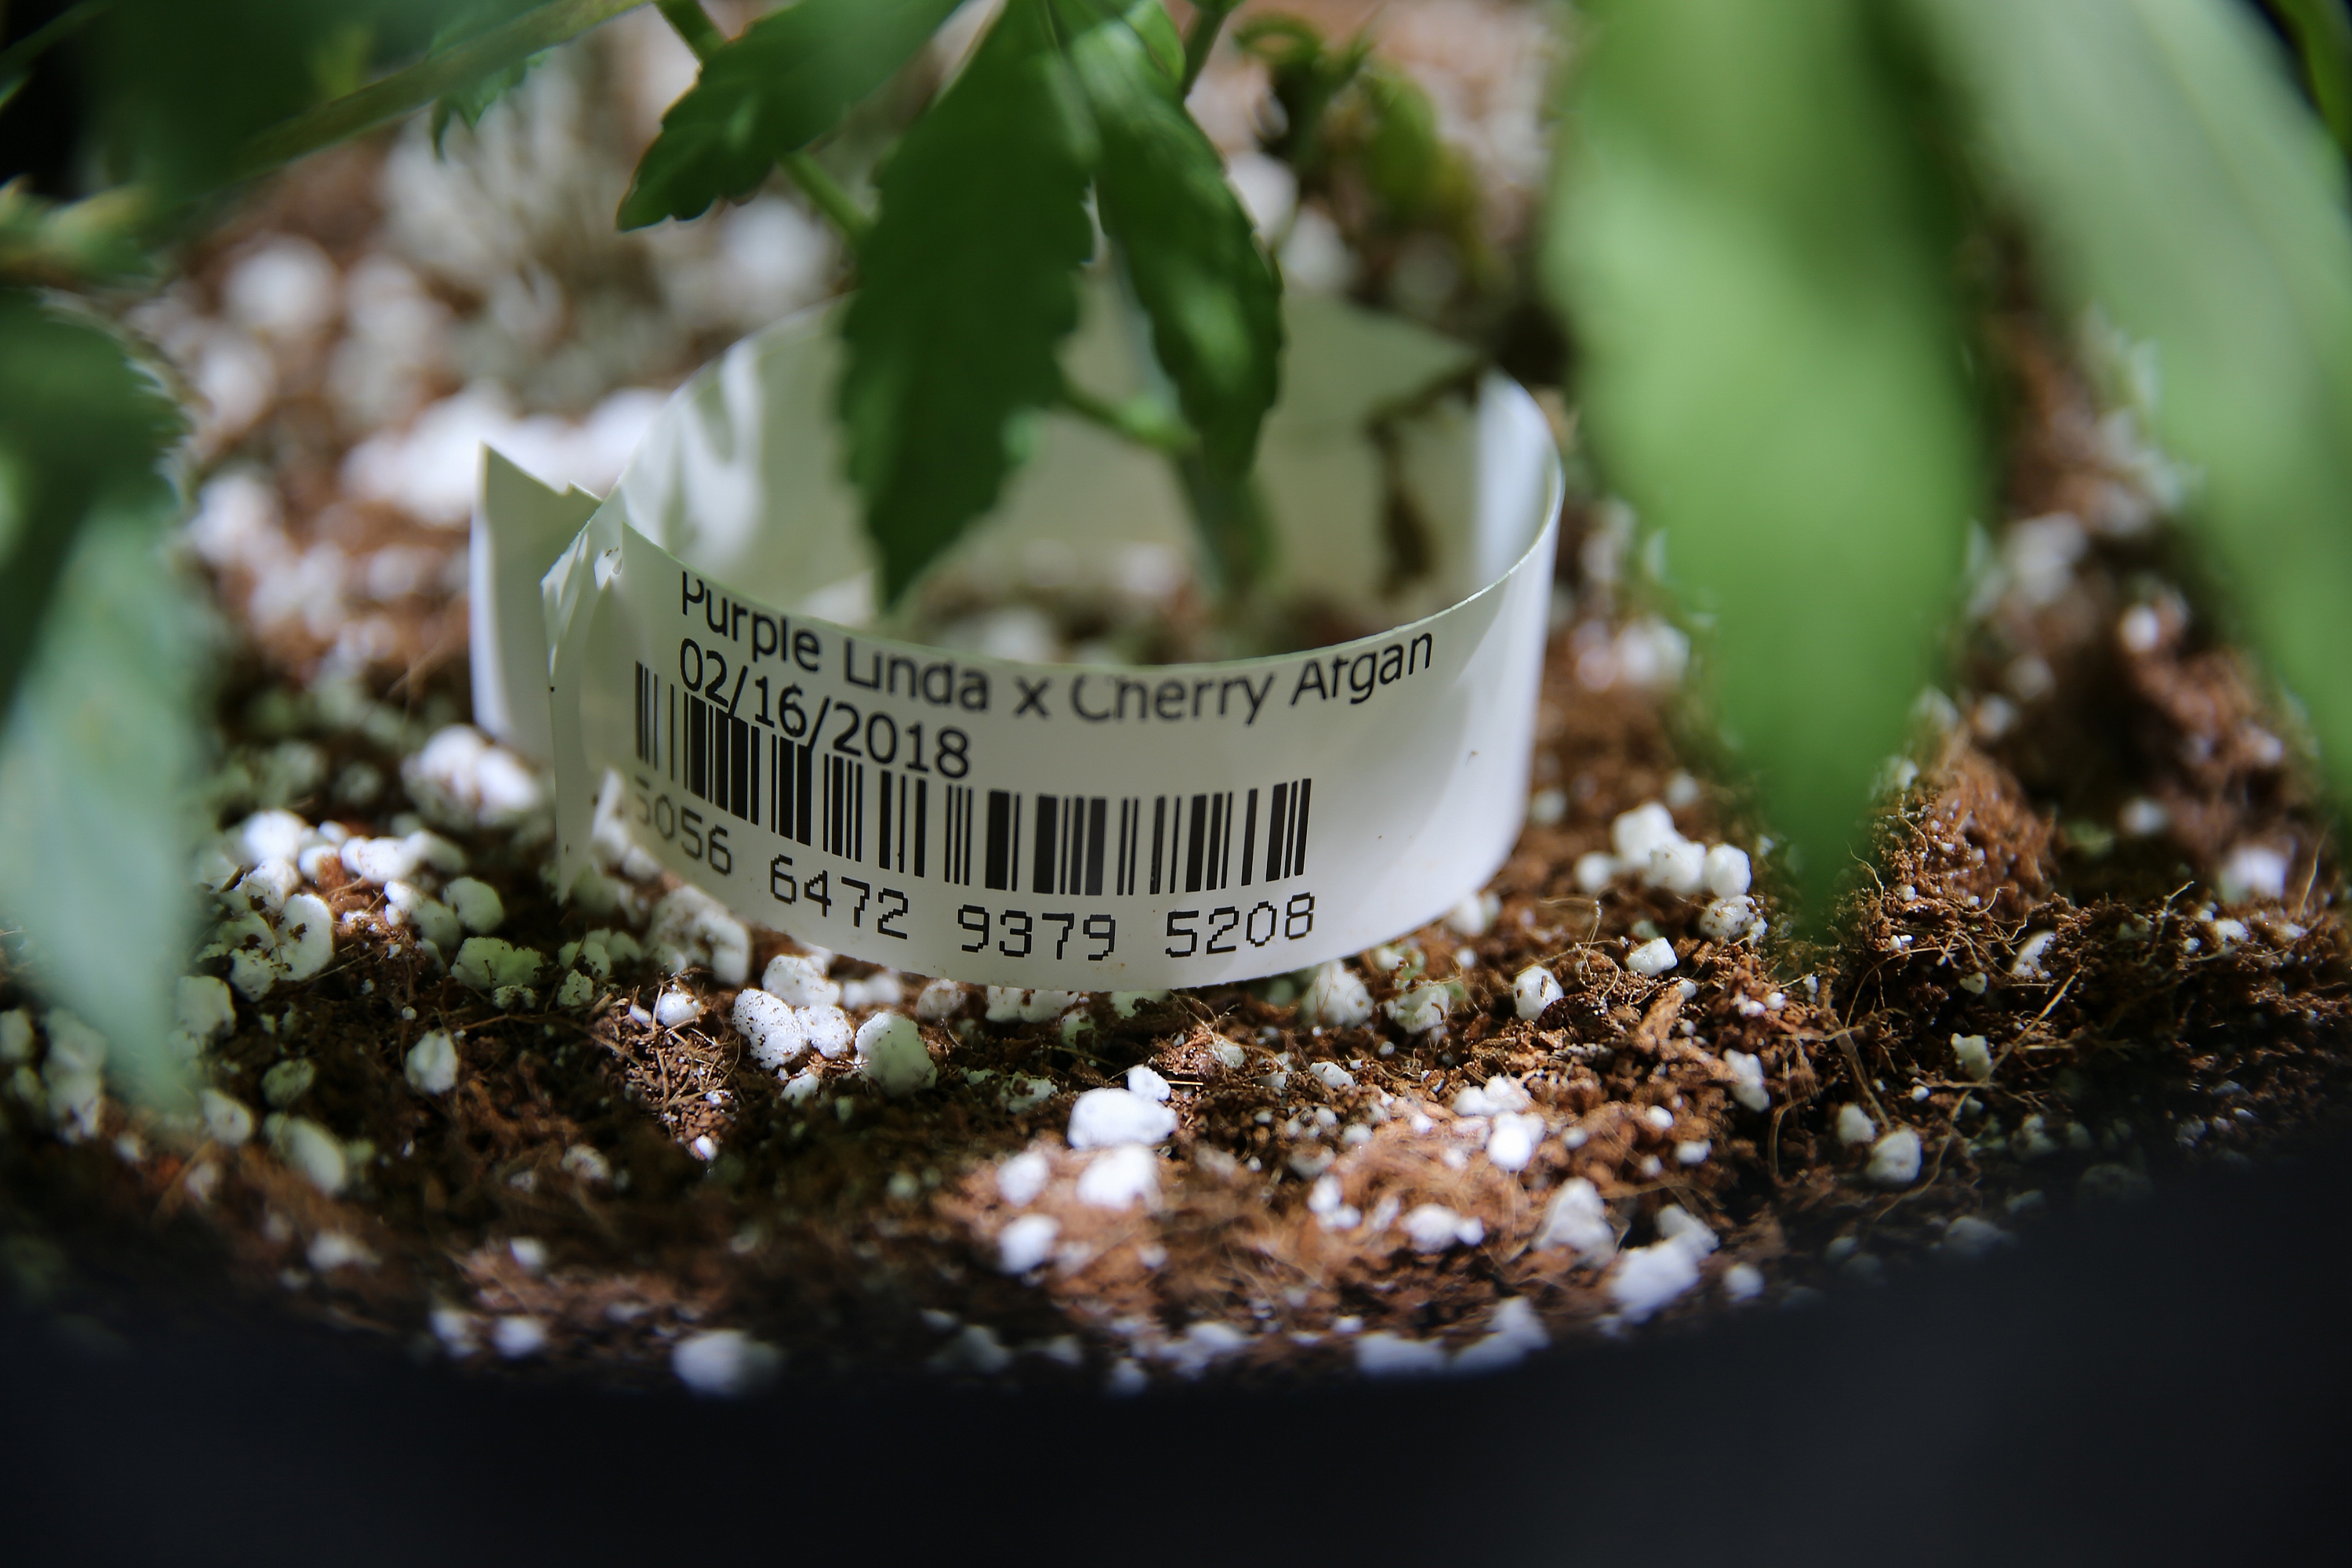 Cannabis is tagged and tracked from seed to sale at AltMed Florida.